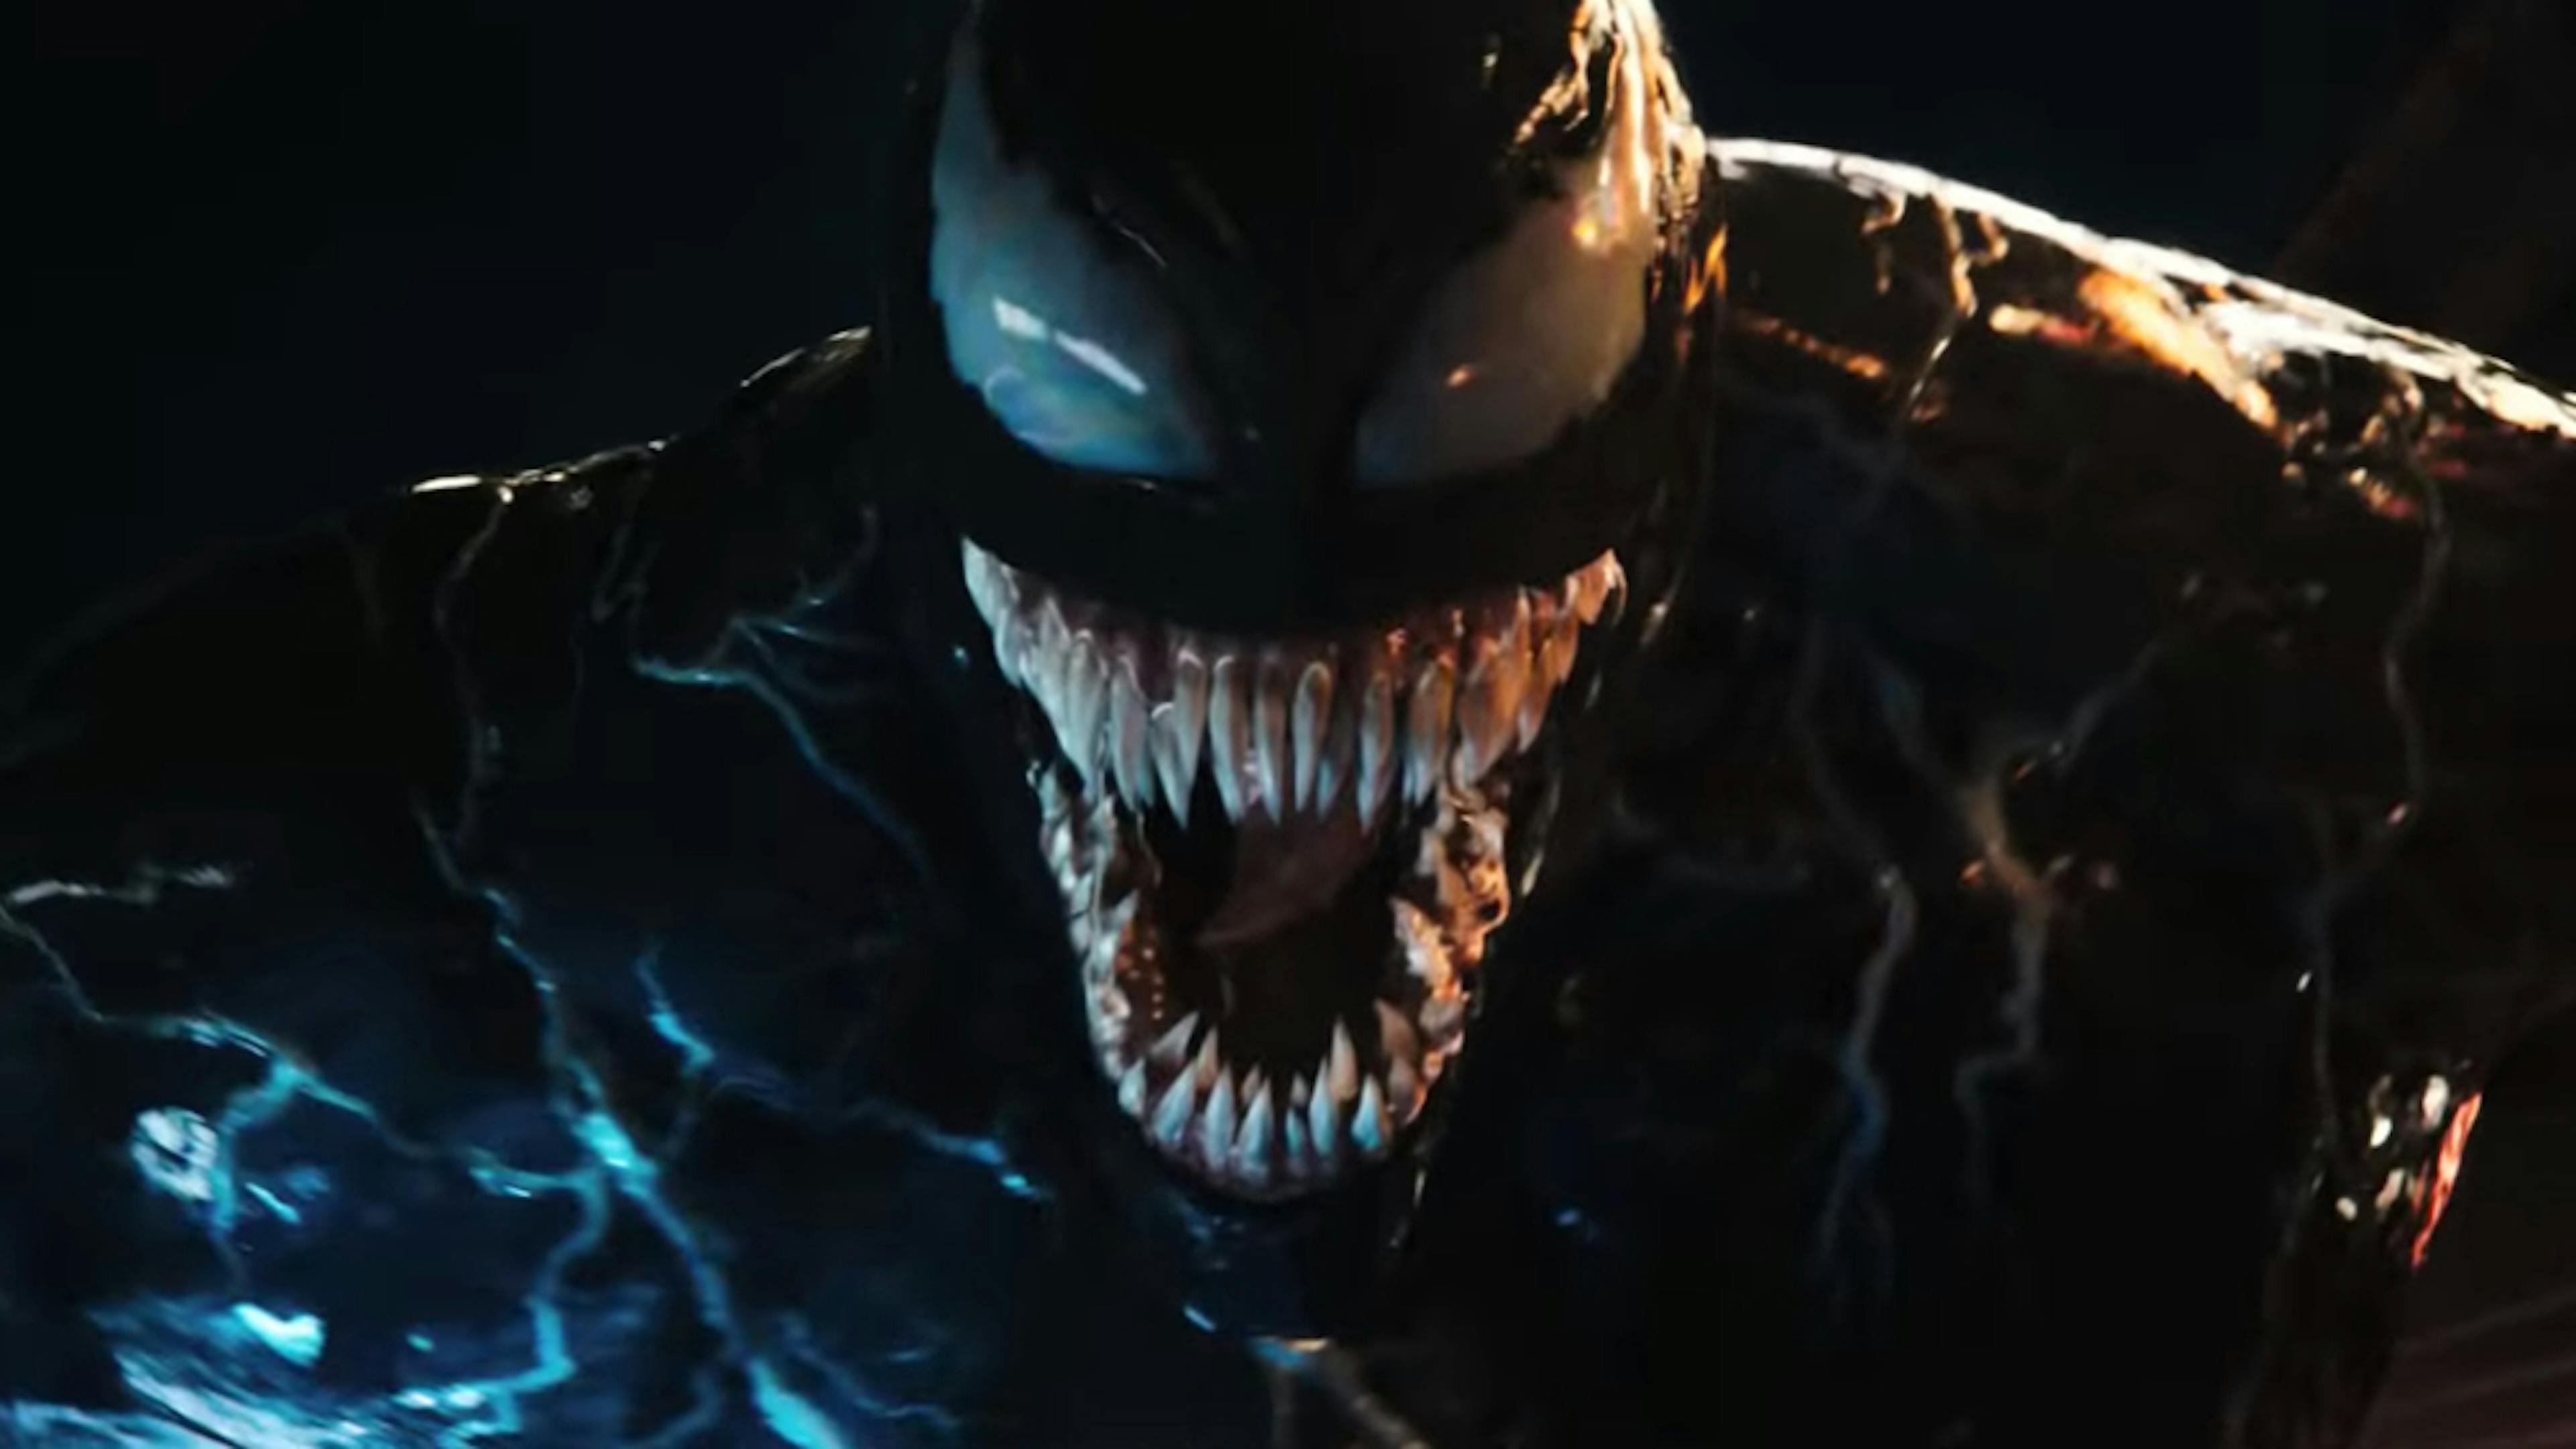 There's A Panic! At The Disco Reference In The Venom Movie Soundtrack